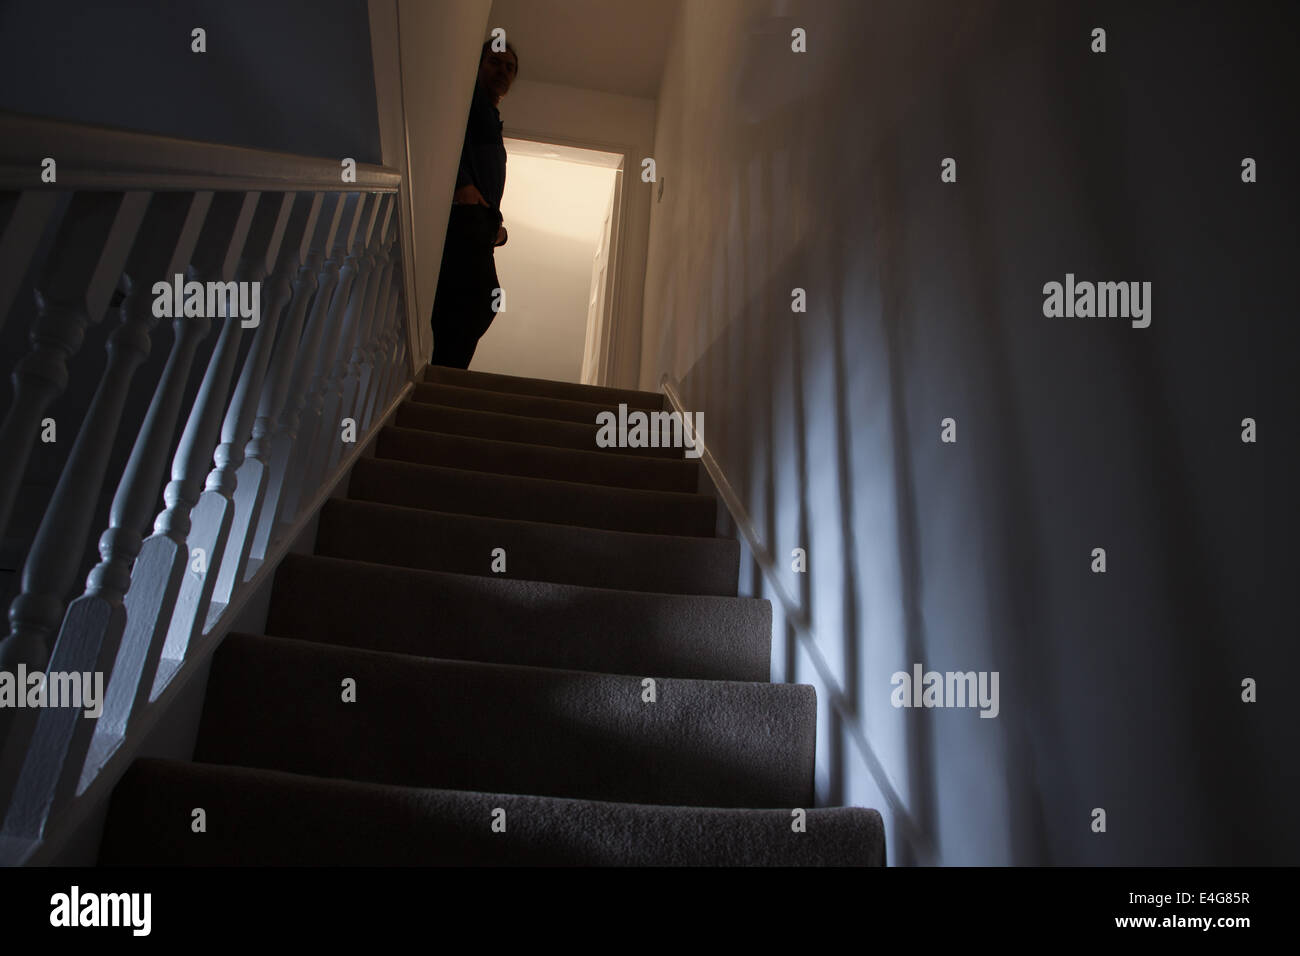 Silhouette of a man leaning against the wall at the top of a stairway, shadows cast on the walls from the light below. Stock Photo